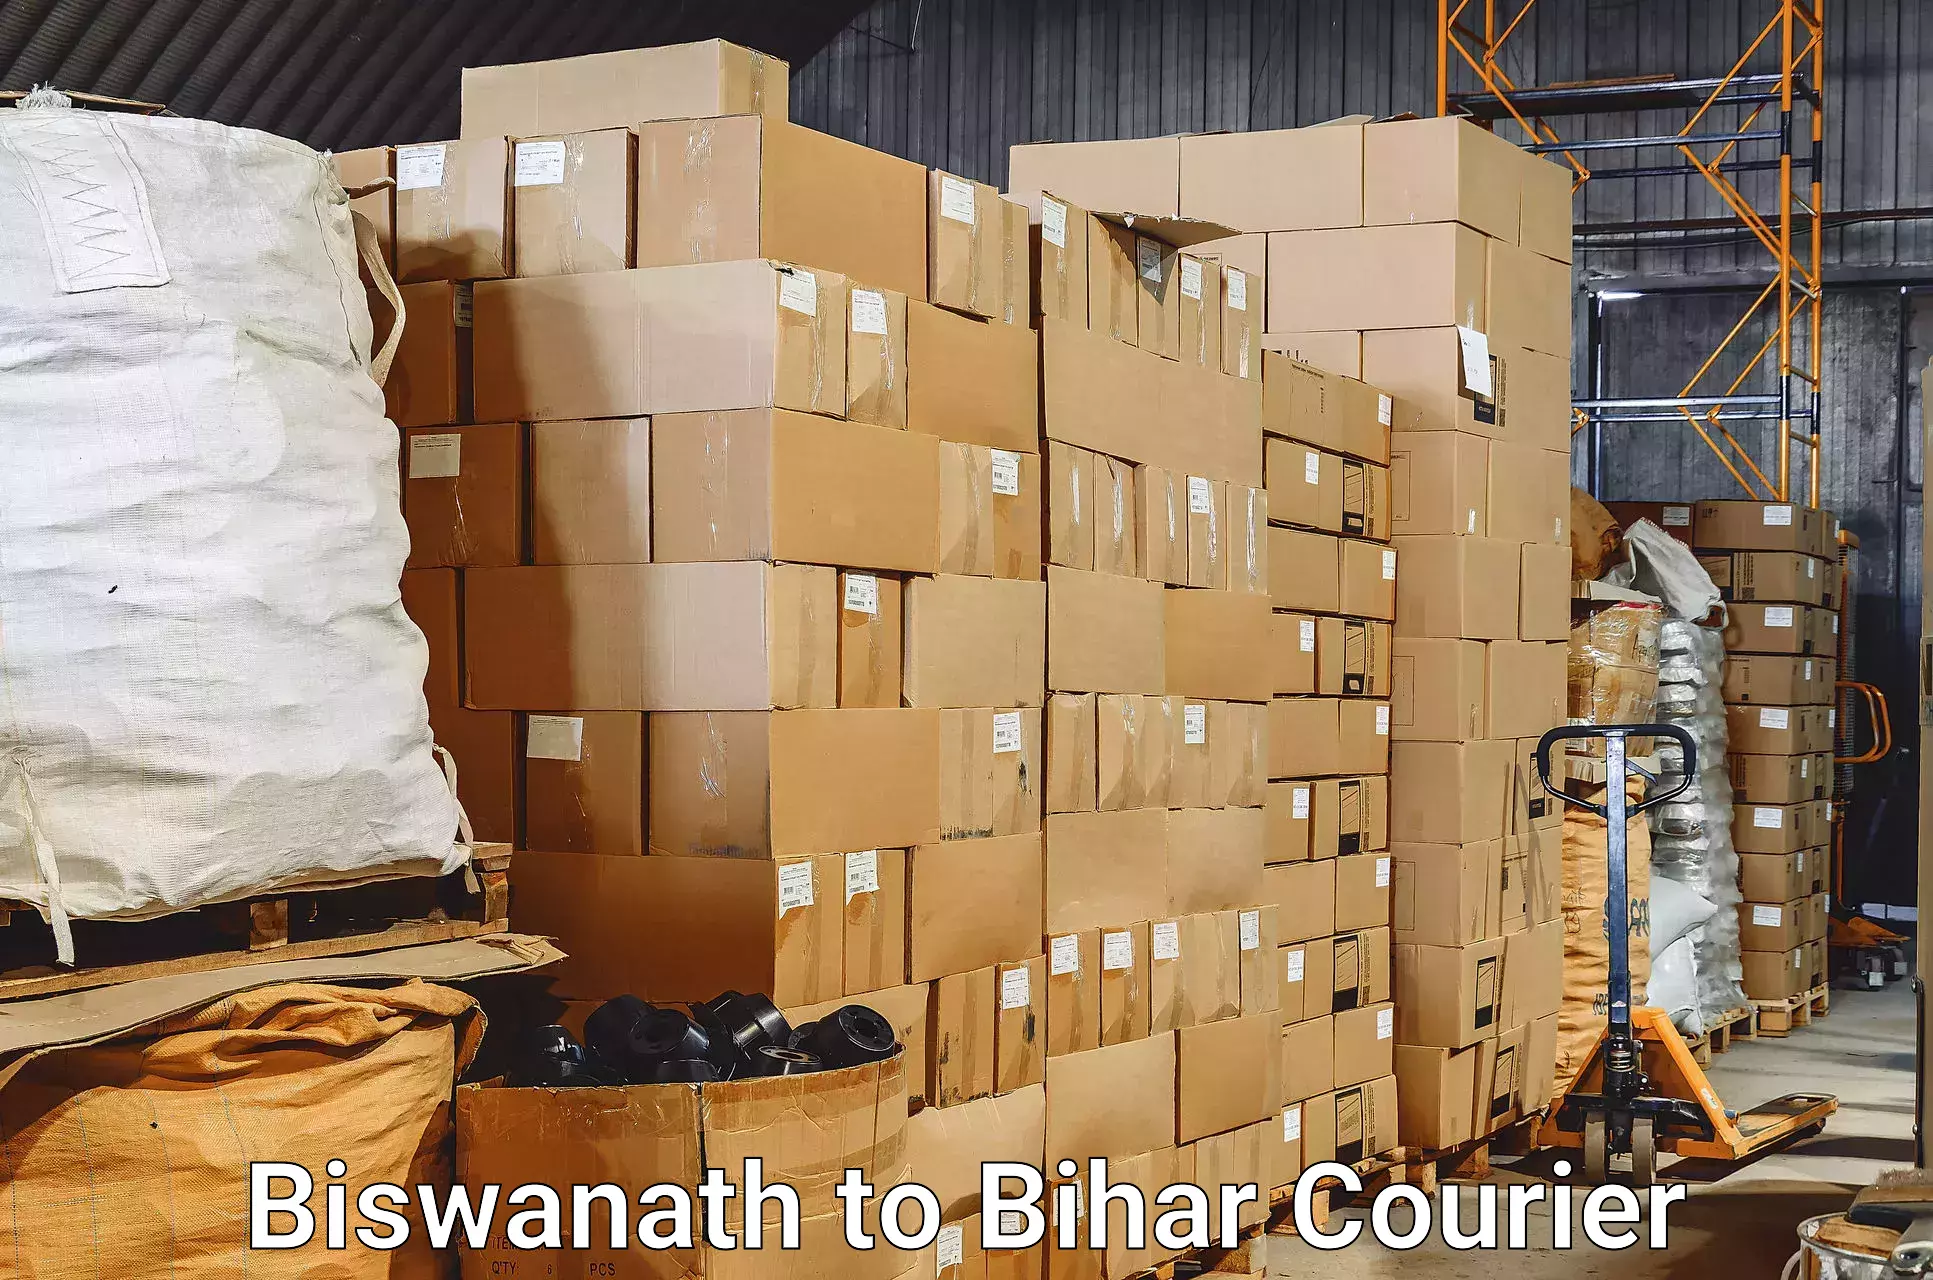 Personal luggage delivery in Biswanath to Bankipore